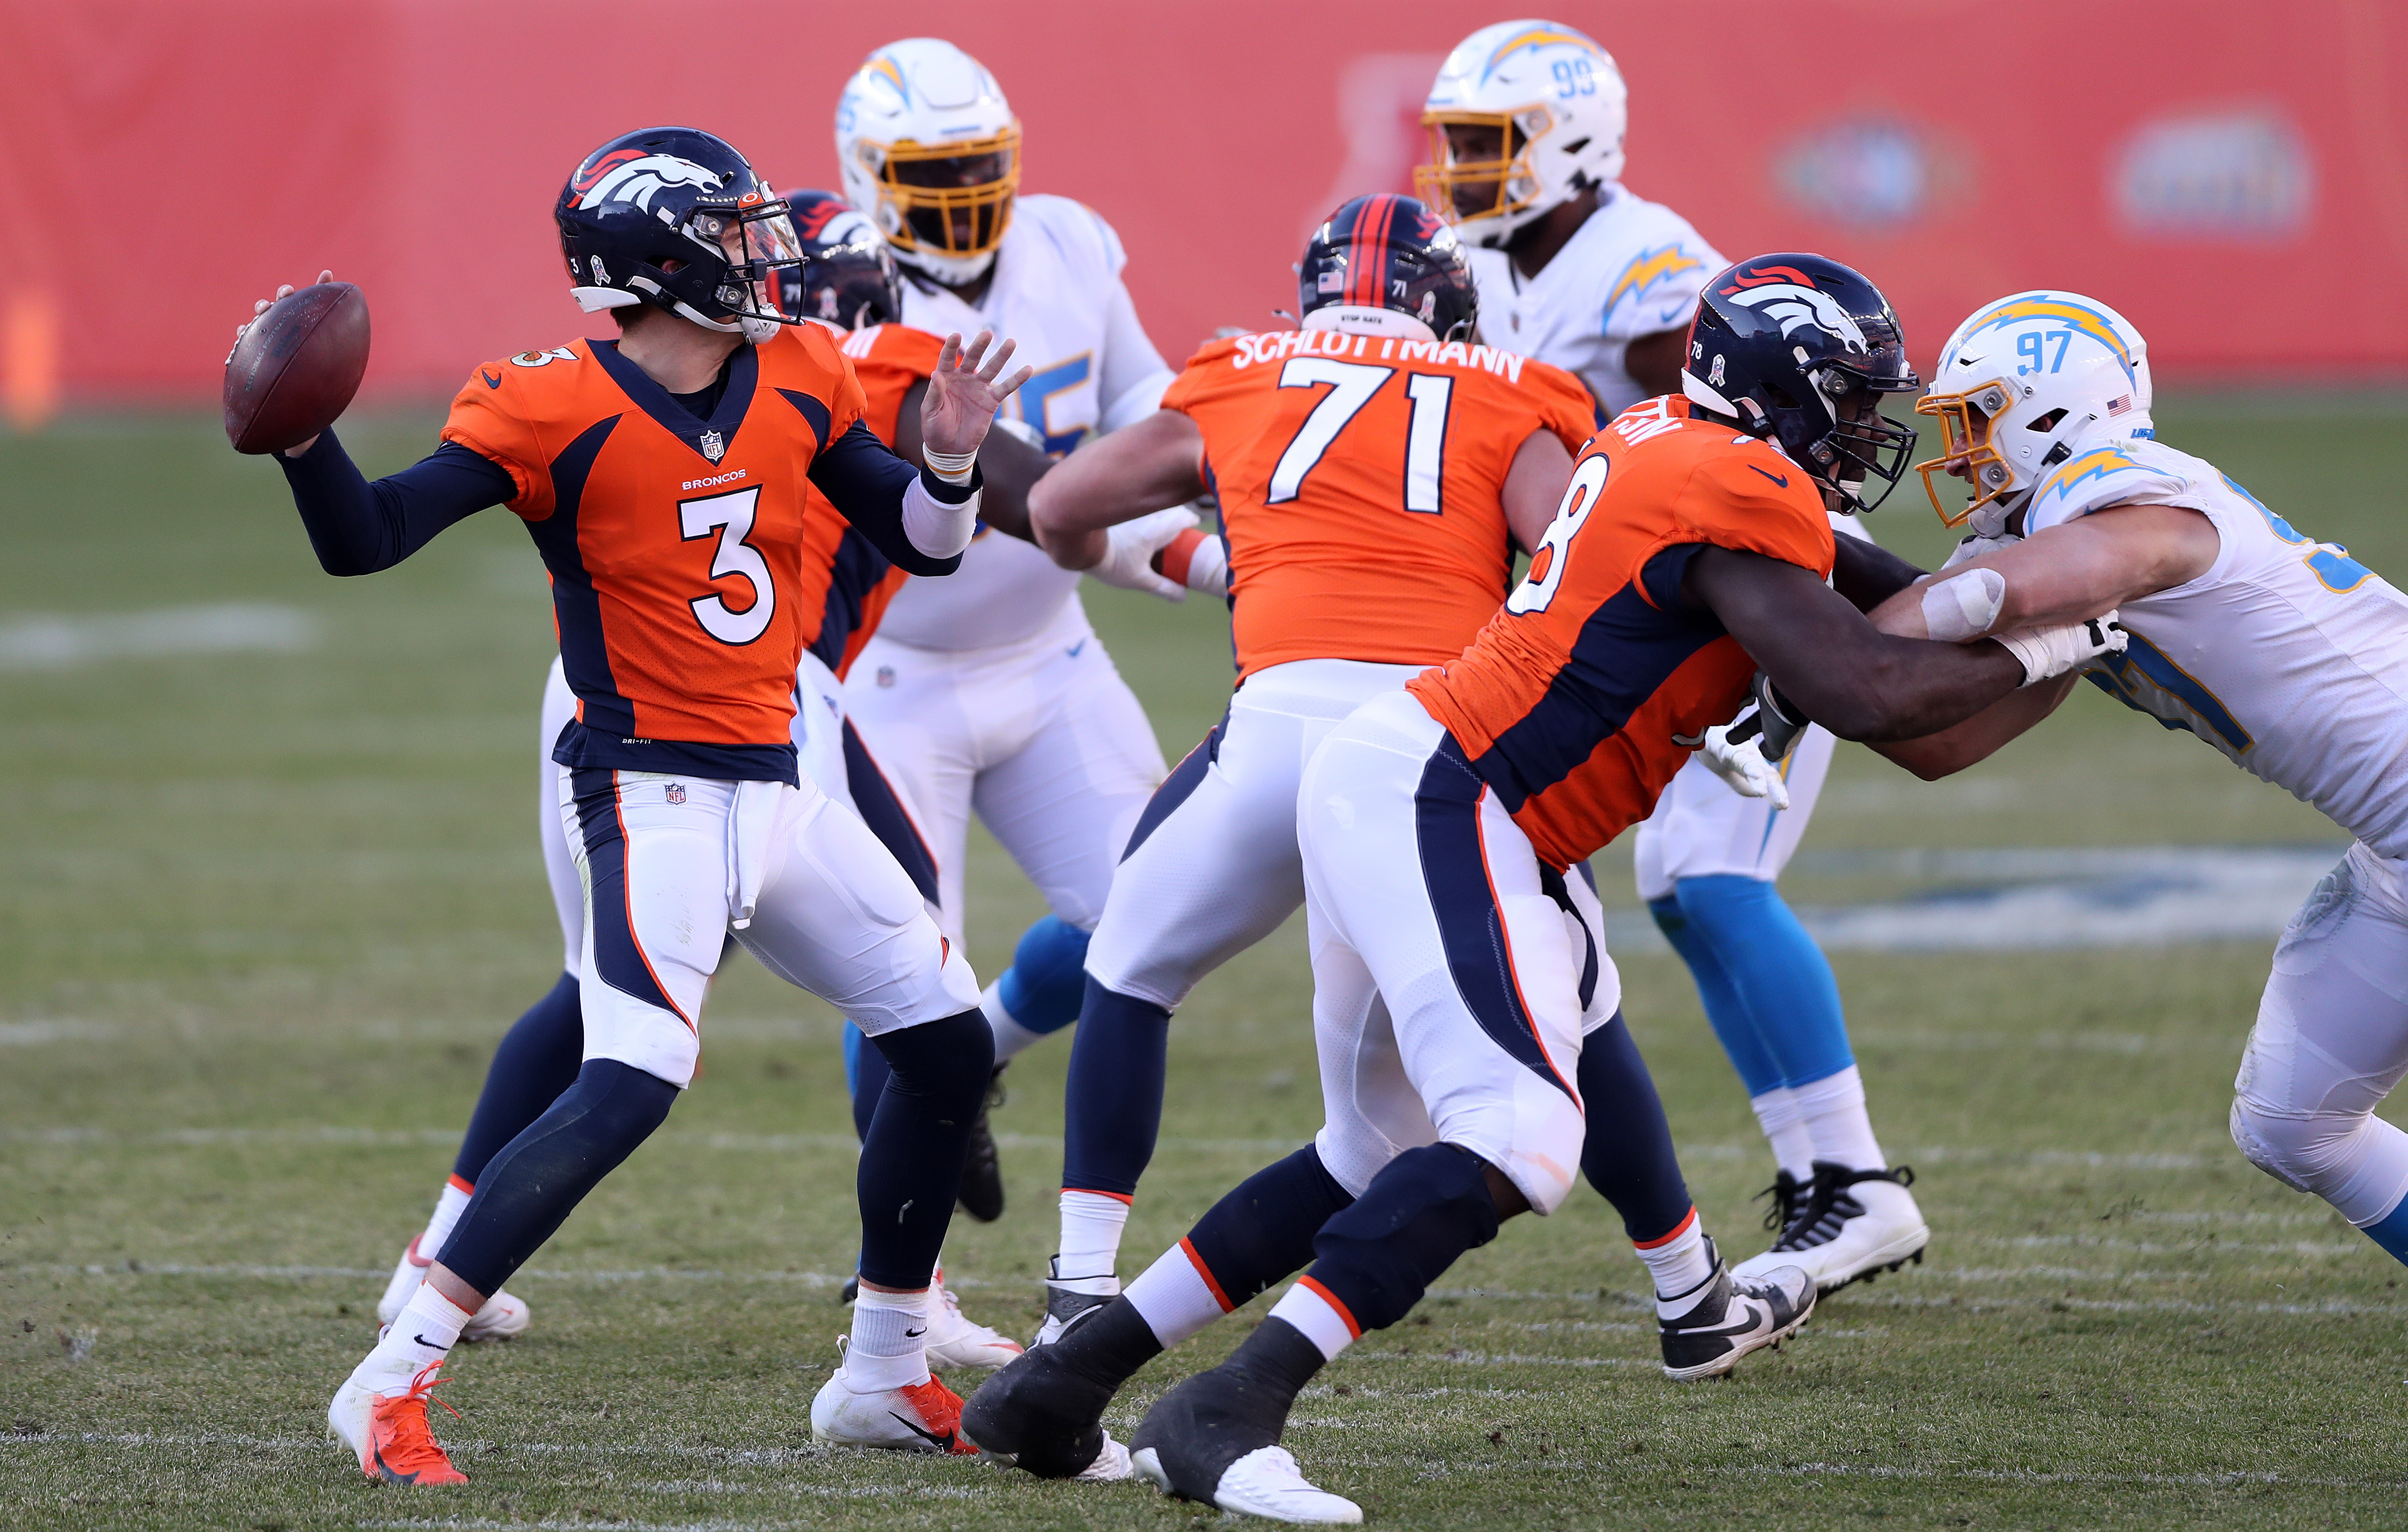 Quarterback Drew Lock of the Denver Broncos looks to pass against the Los Angeles Chargers in the second quarter of the game at Empower Field At Mile High on Nov. 1, 2020.